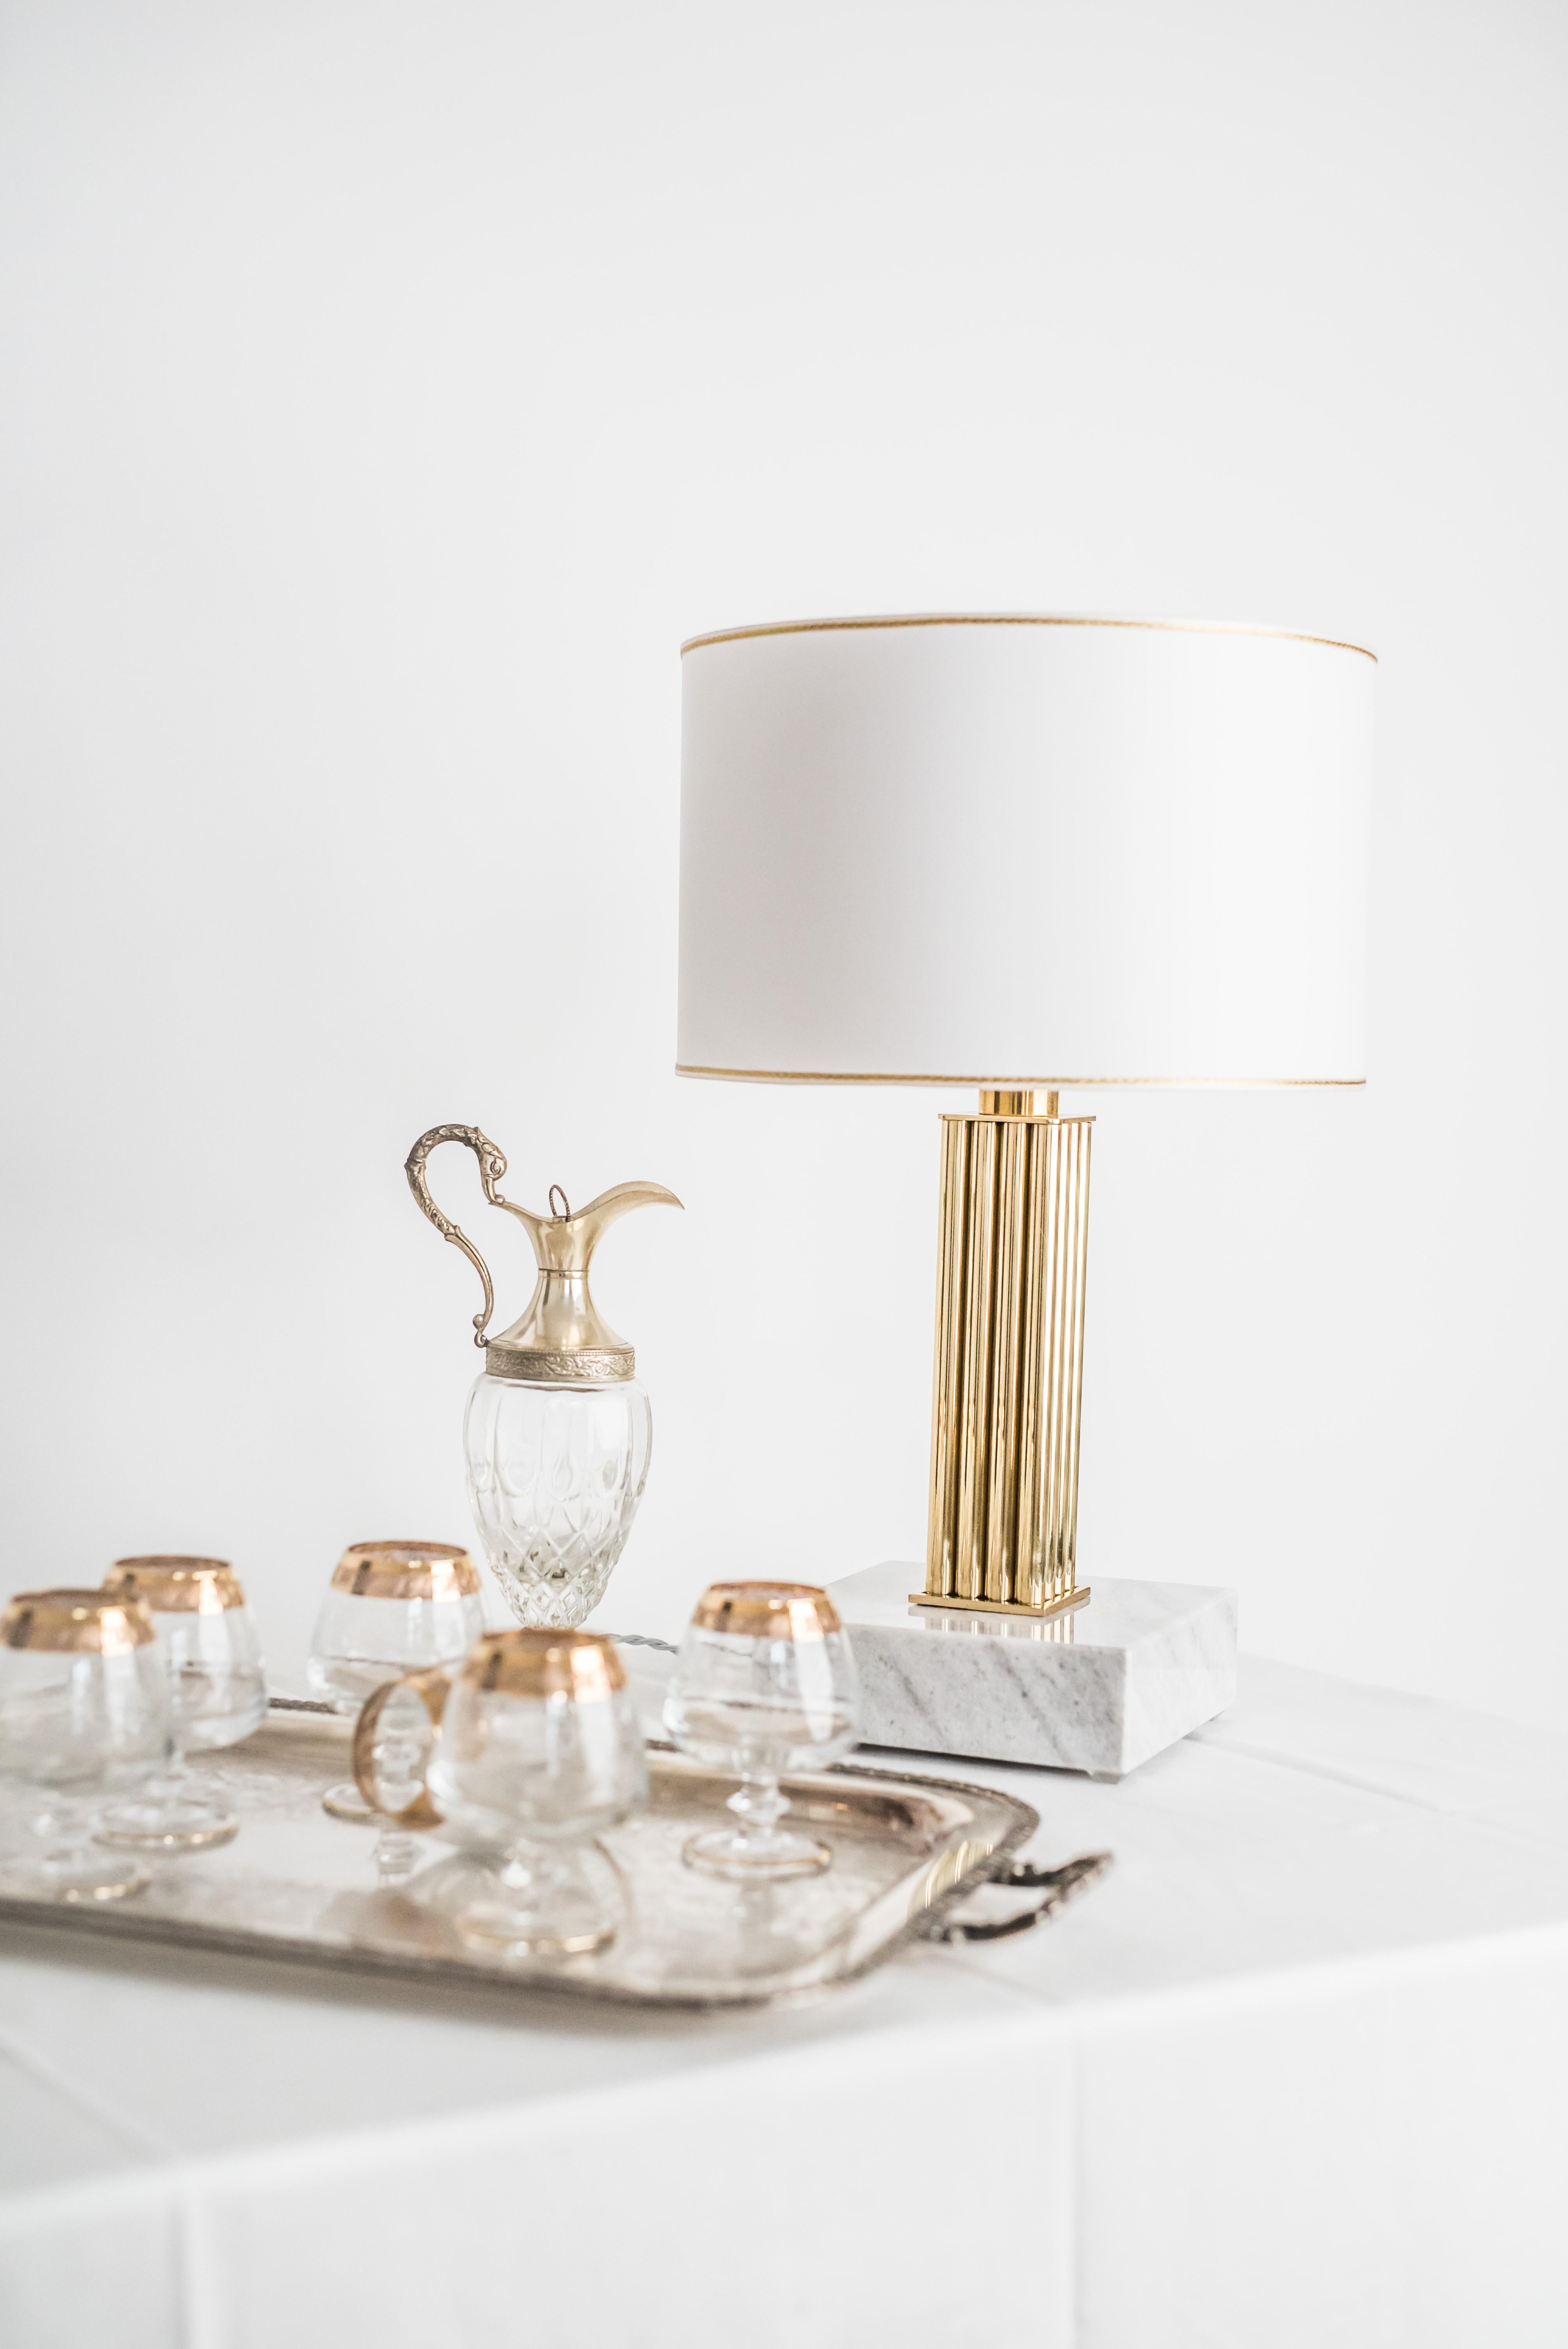 Brass Sculpted Table Lamp by Brajak Vitberg
ATHENS 1.1.
Materials: Mura marble (also available with carrara marble), Polished brass
white or black cotton lampshade, cotton wiring
Dimensions: 53 x 35 x 35 cm

Bijelic and Brajak are two architects